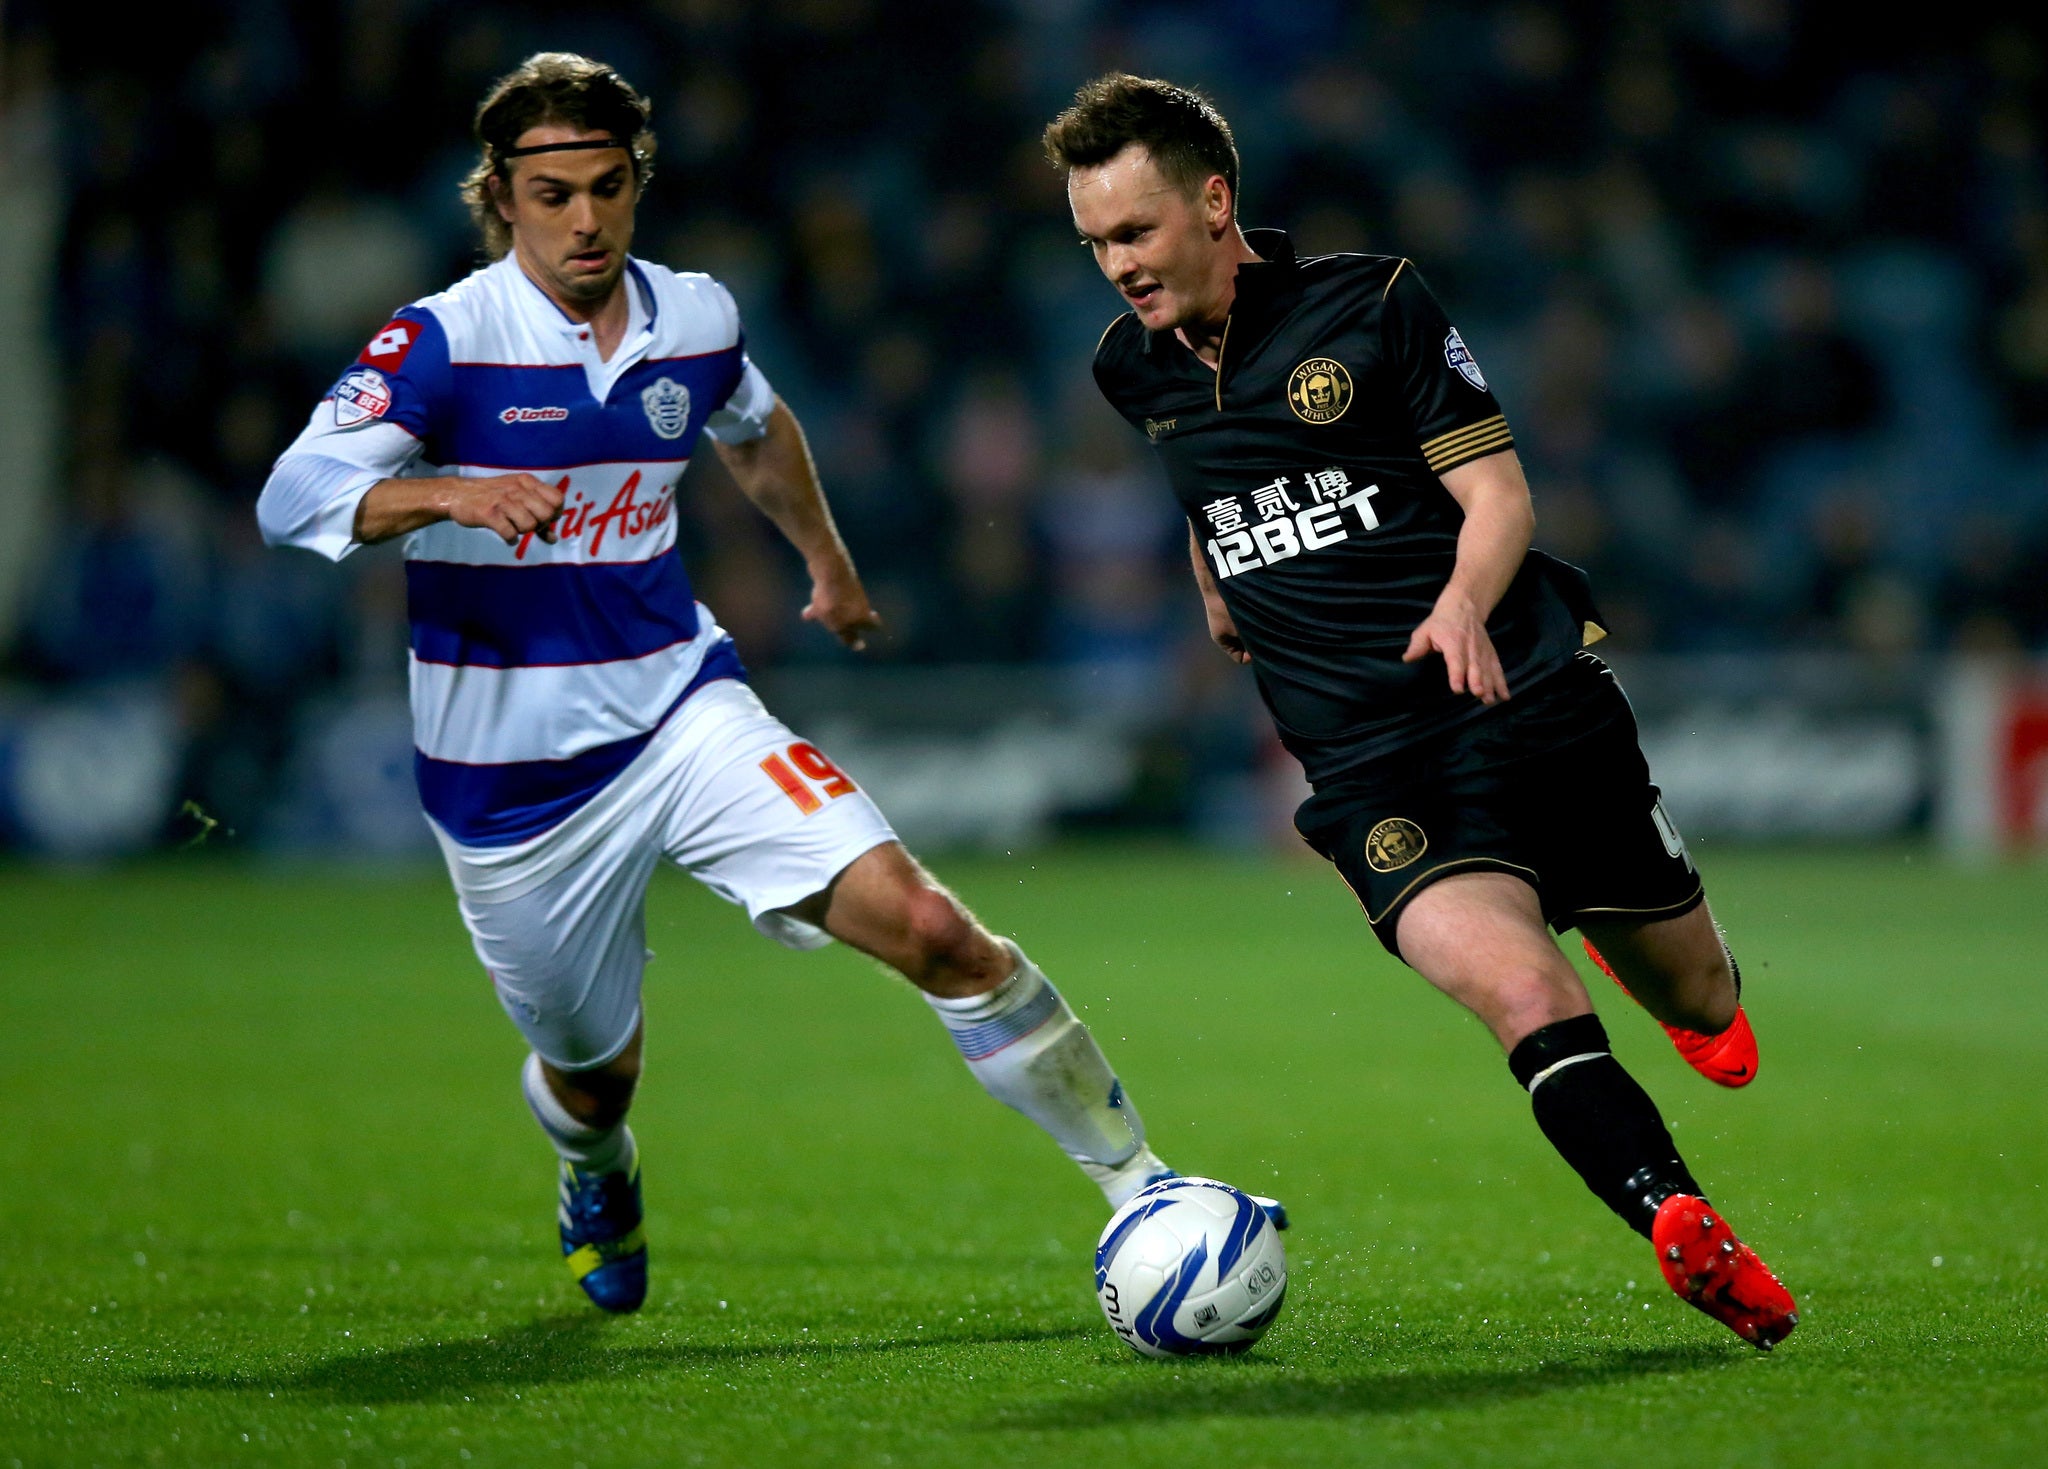 Josh McEachran, on loan from Chelsea, playing for Wigan